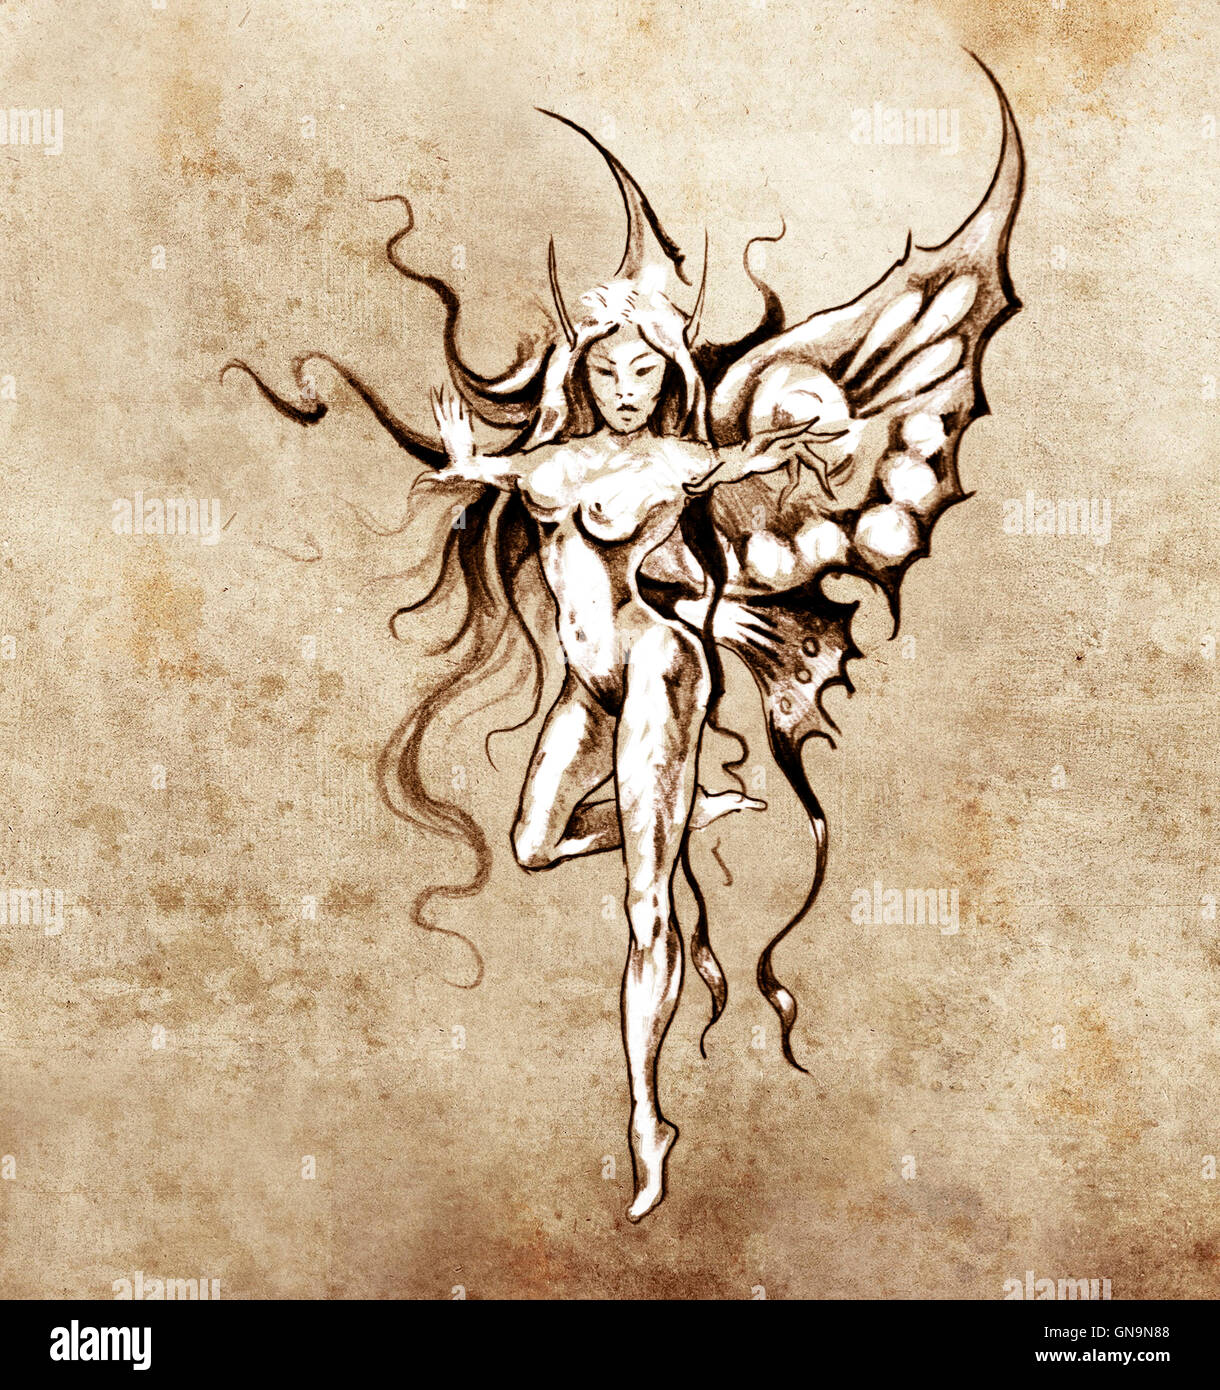 Sketch of tattoo art, fairy butterfly Stock Photo